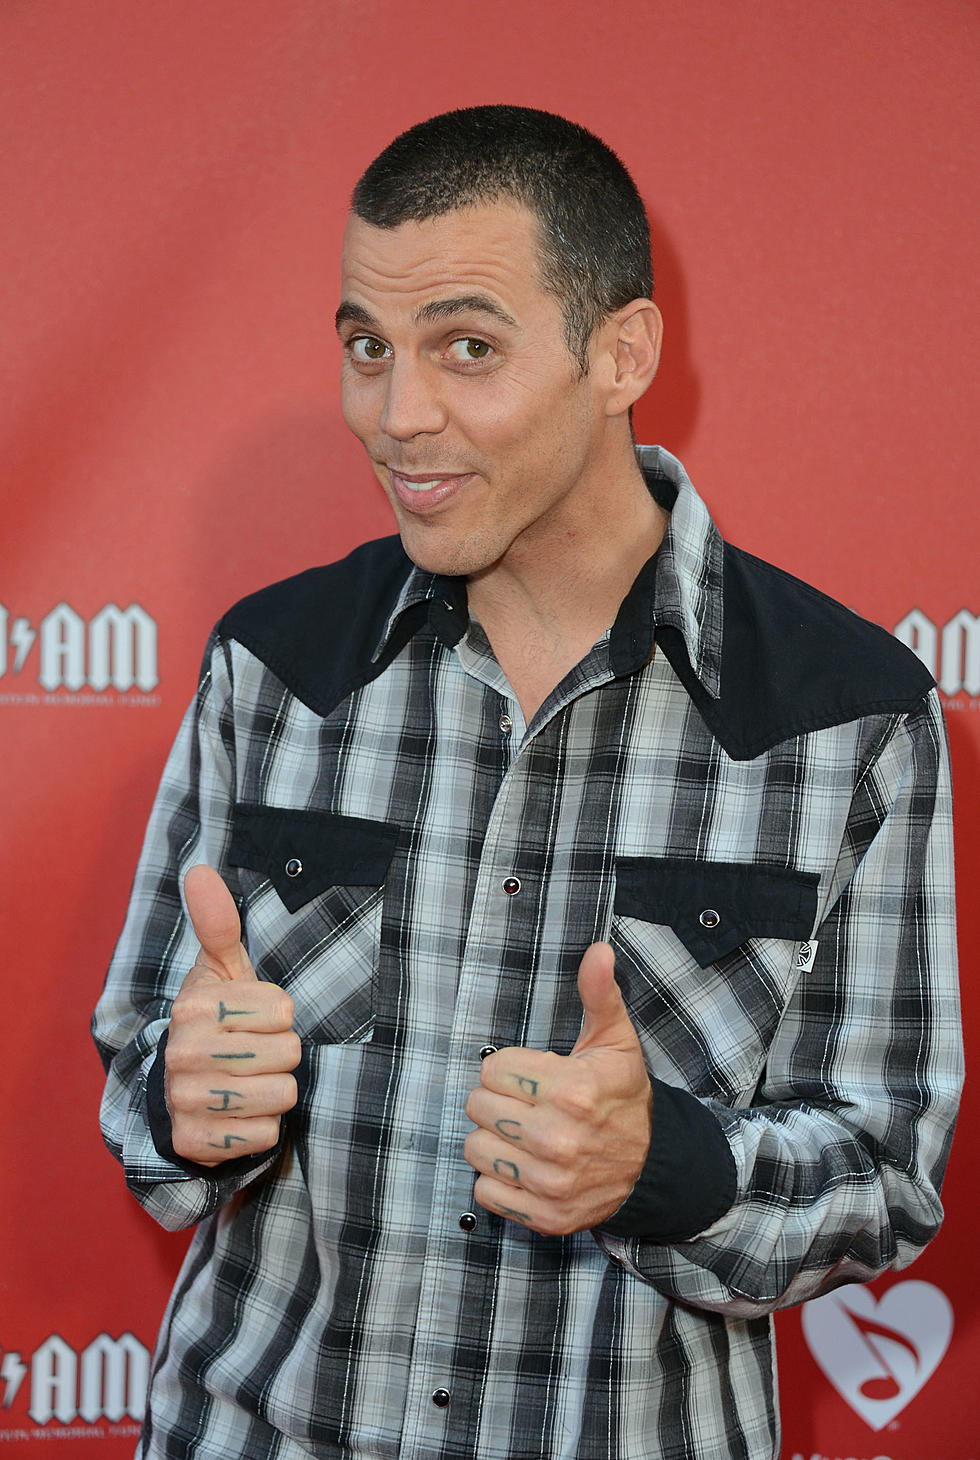 Steve-O Calls Out Celebrities for Their Ice Bucket Challenges